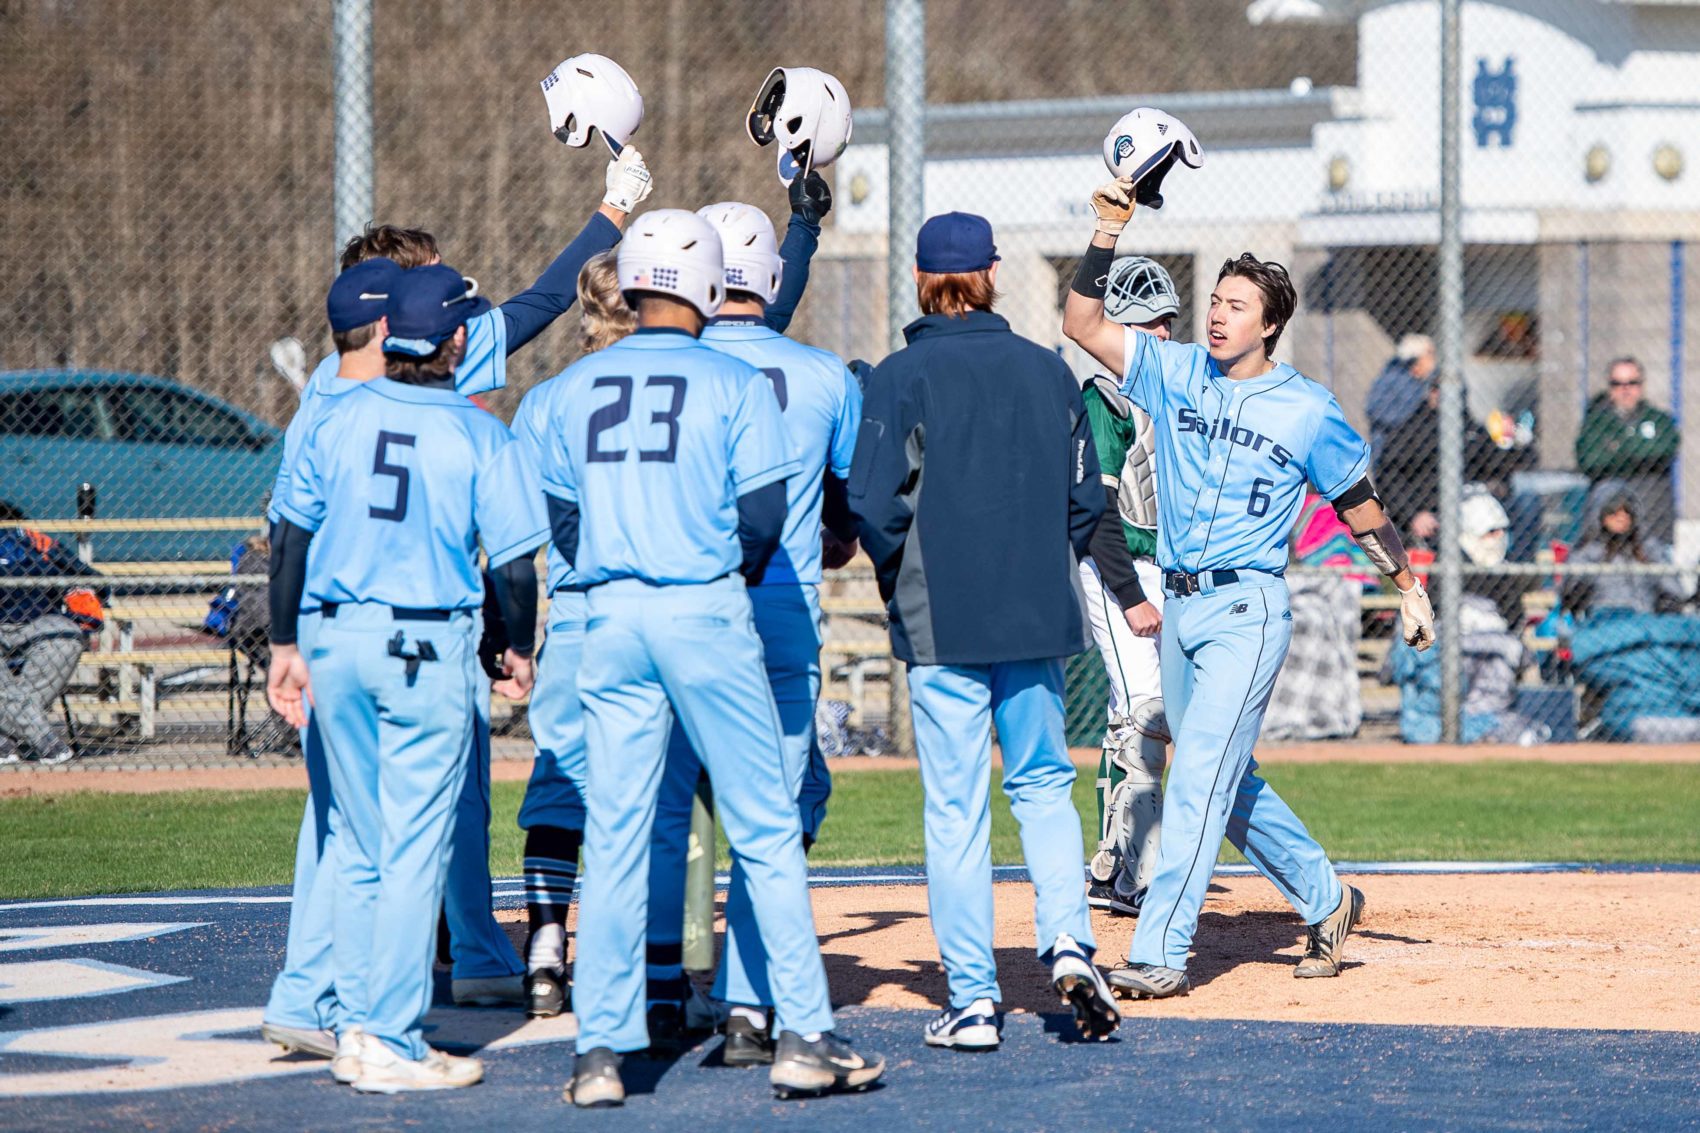 Mona Shores remains perfect sweeps doubleheader from Zeeland West 10-0 and 5-3